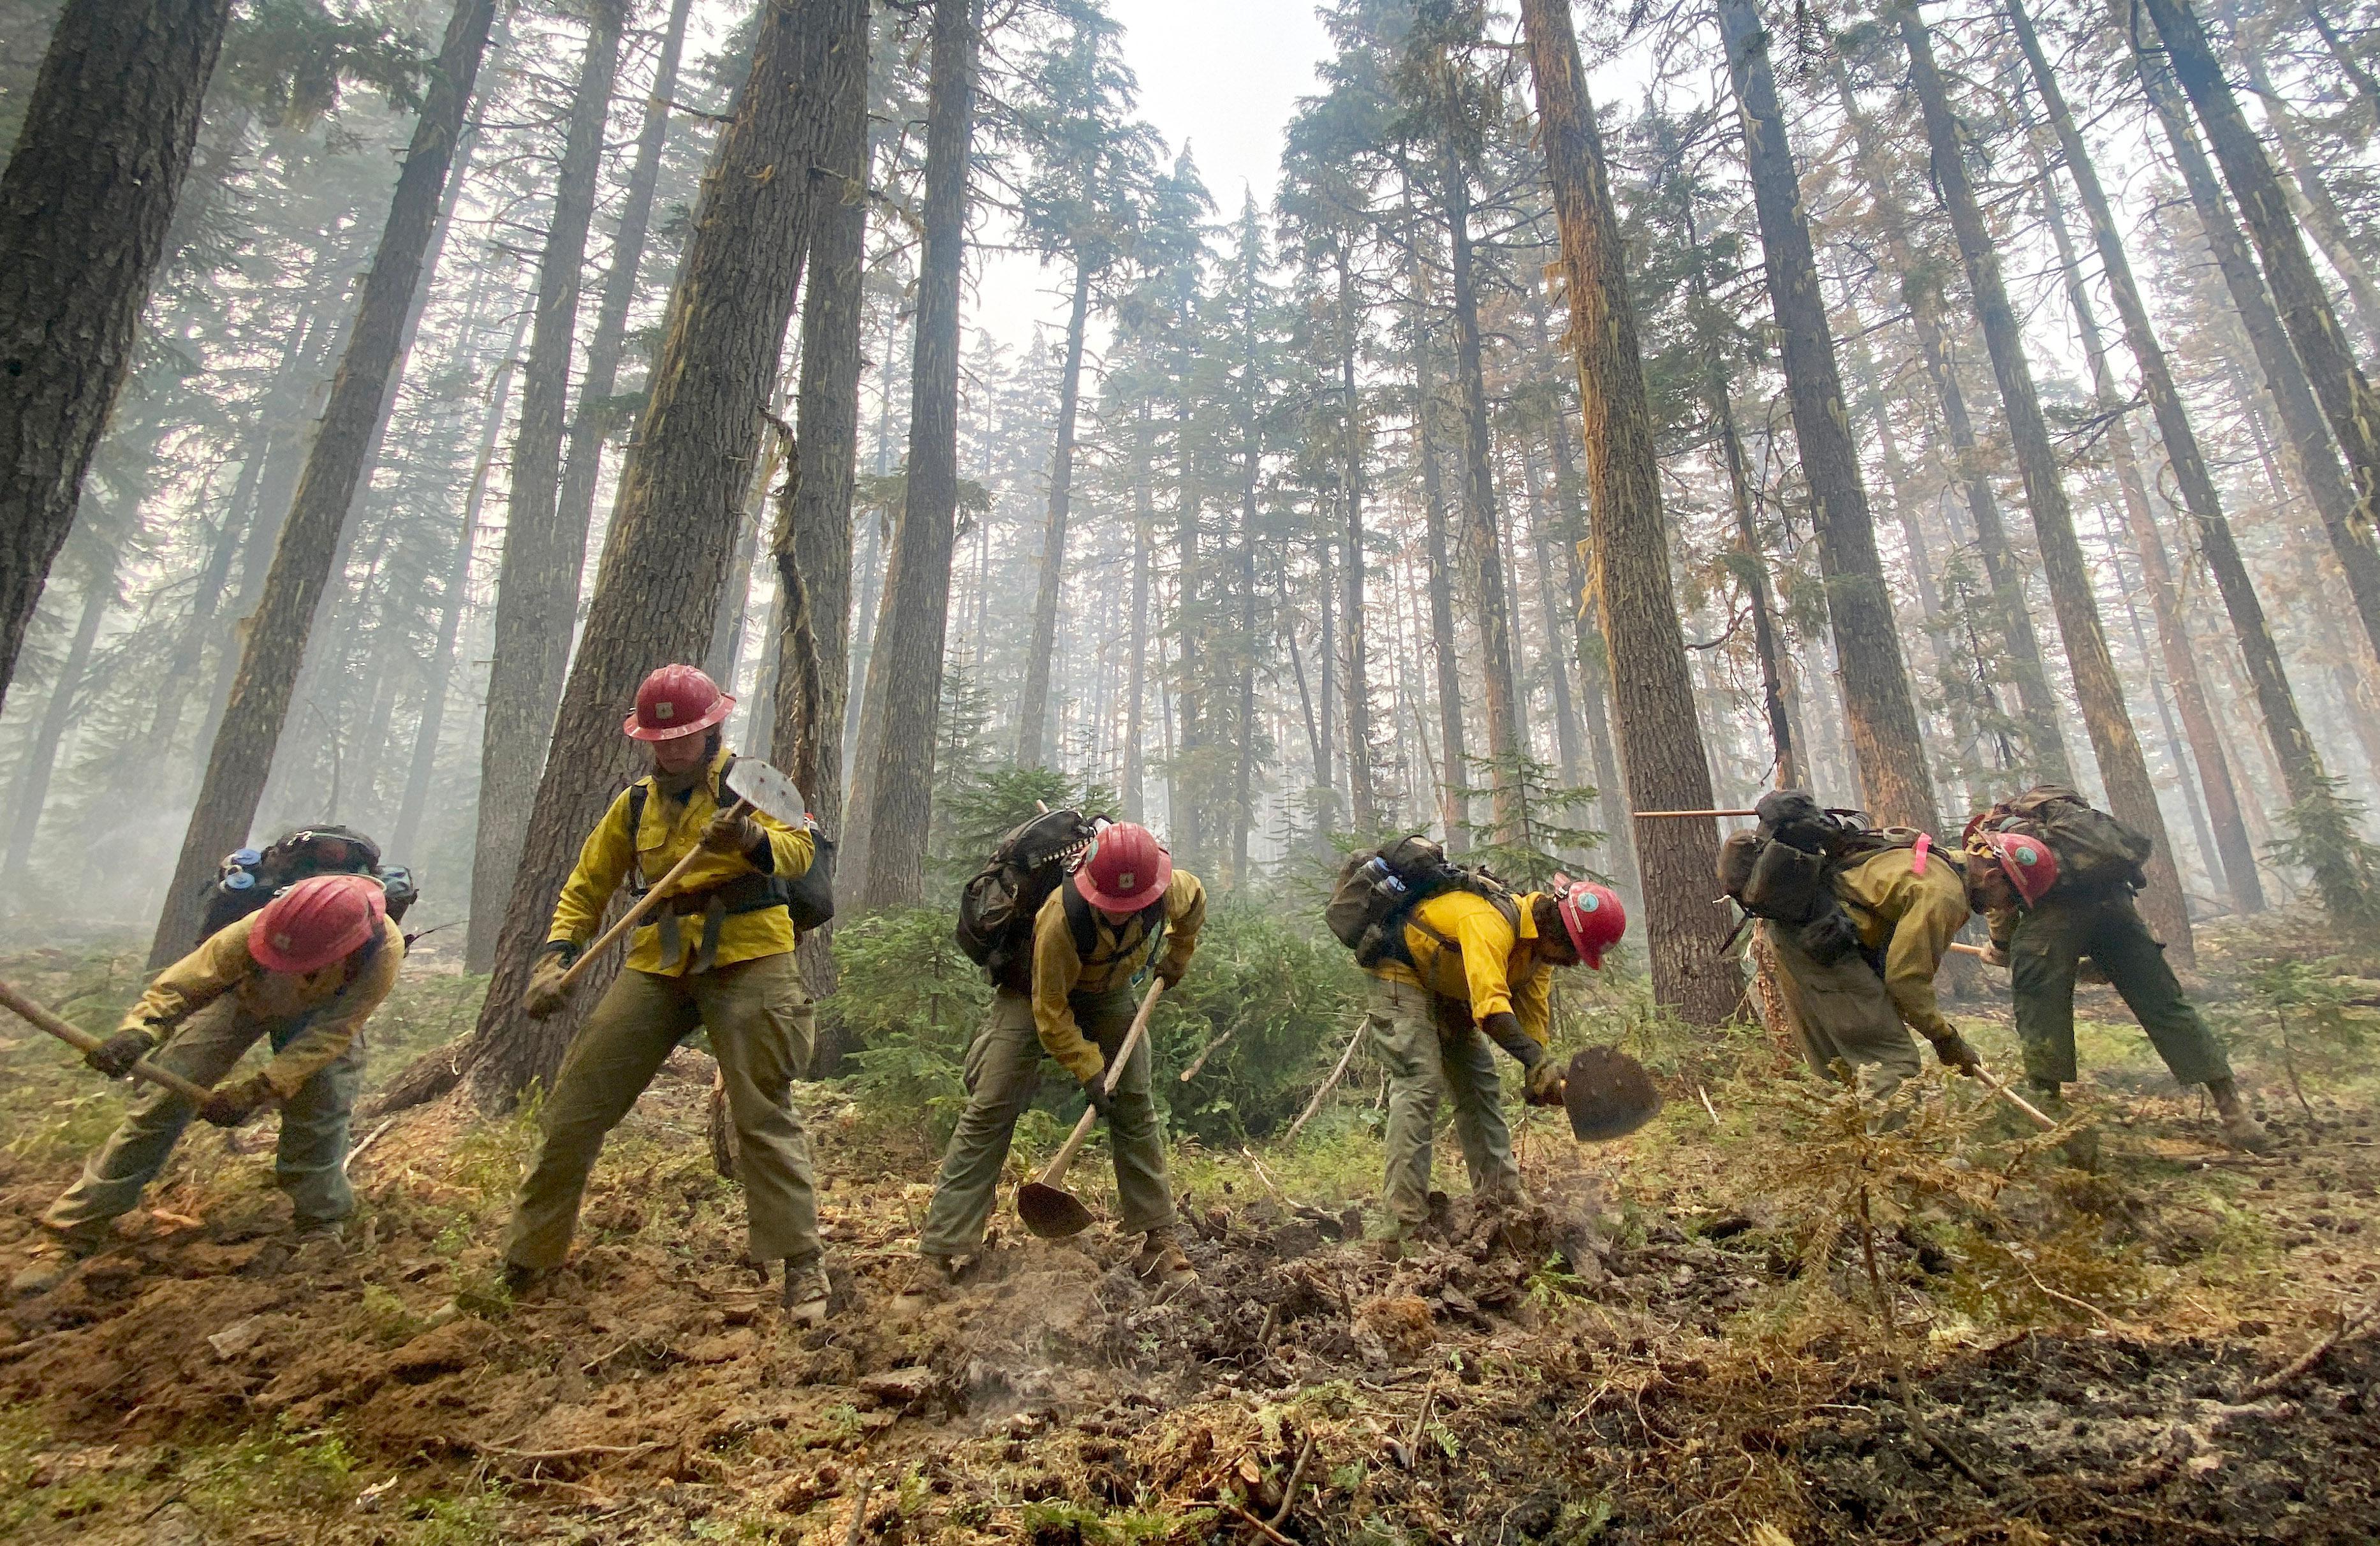 Firefighters digging direct fireline in green and yellow wildland fire personal protective equipment at the transition between burned and unburned forest.